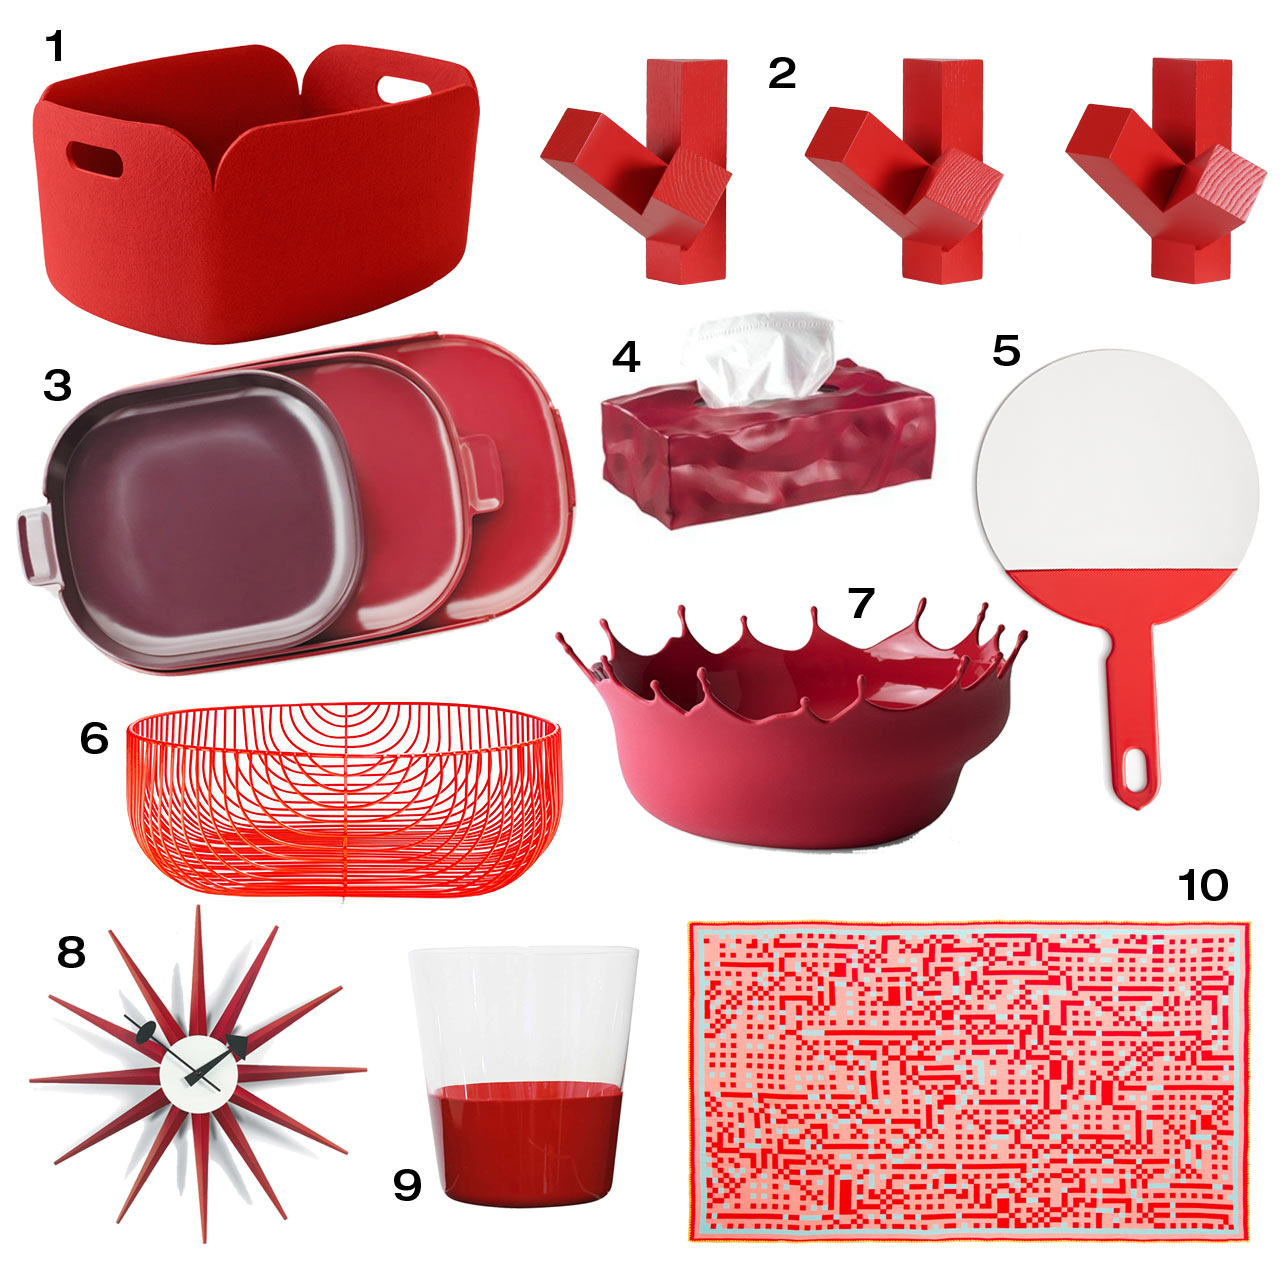 10 Red Objects You’ll Fall In Love With